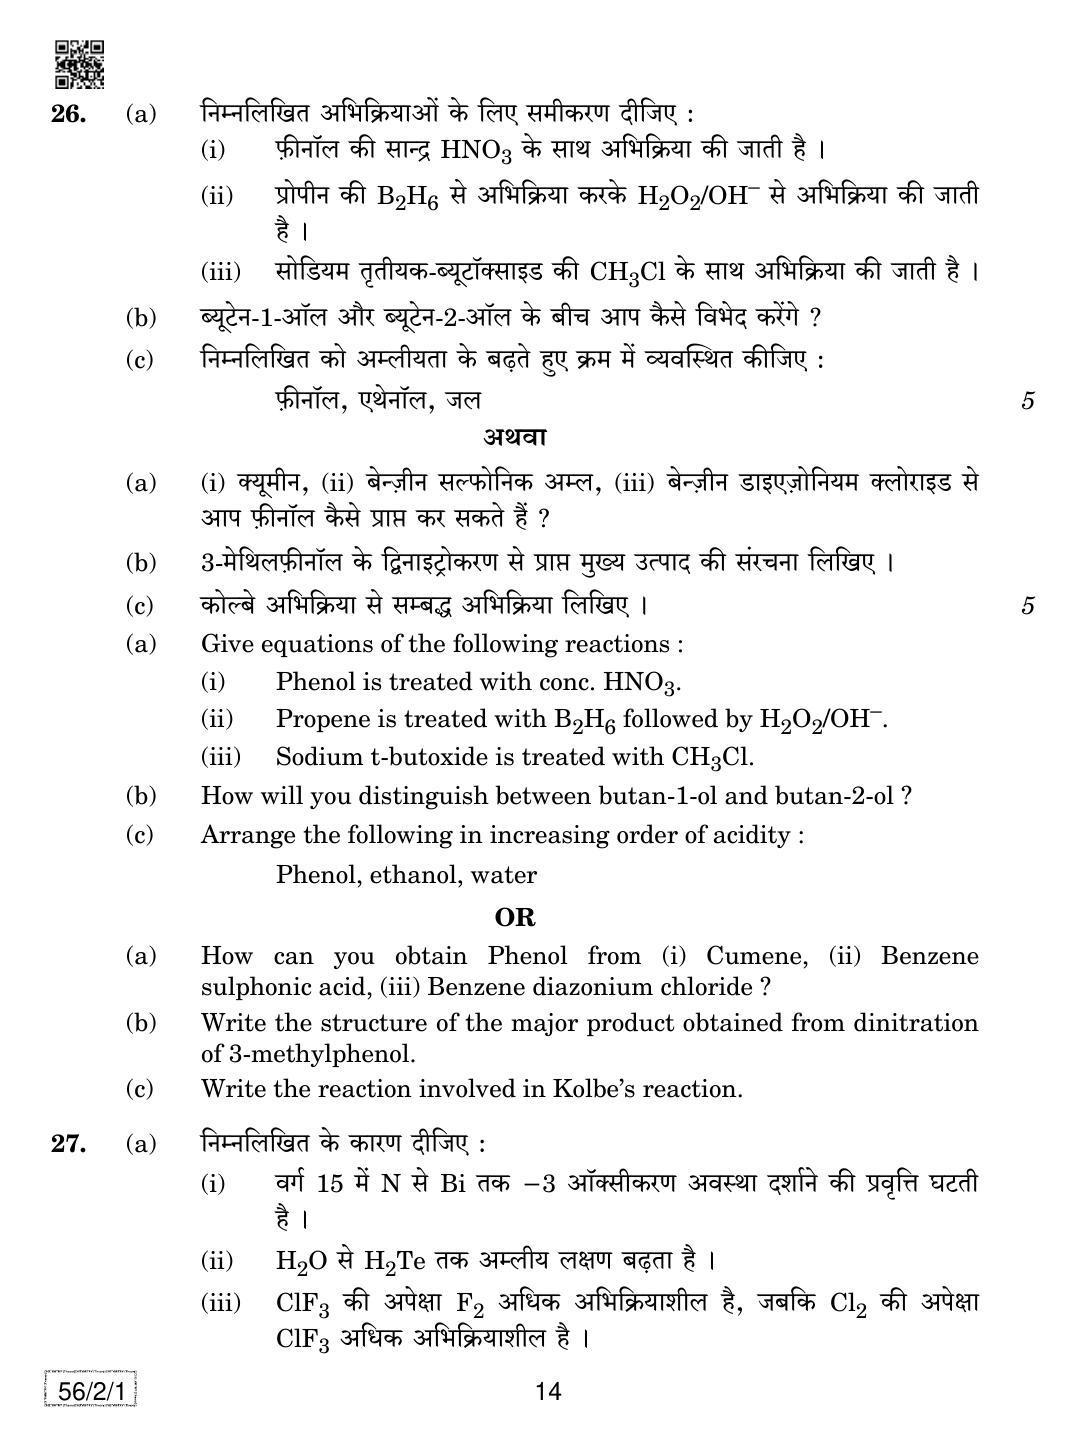 CBSE Class 12 56-2-1 Chemistry 2019 Question Paper - Page 14